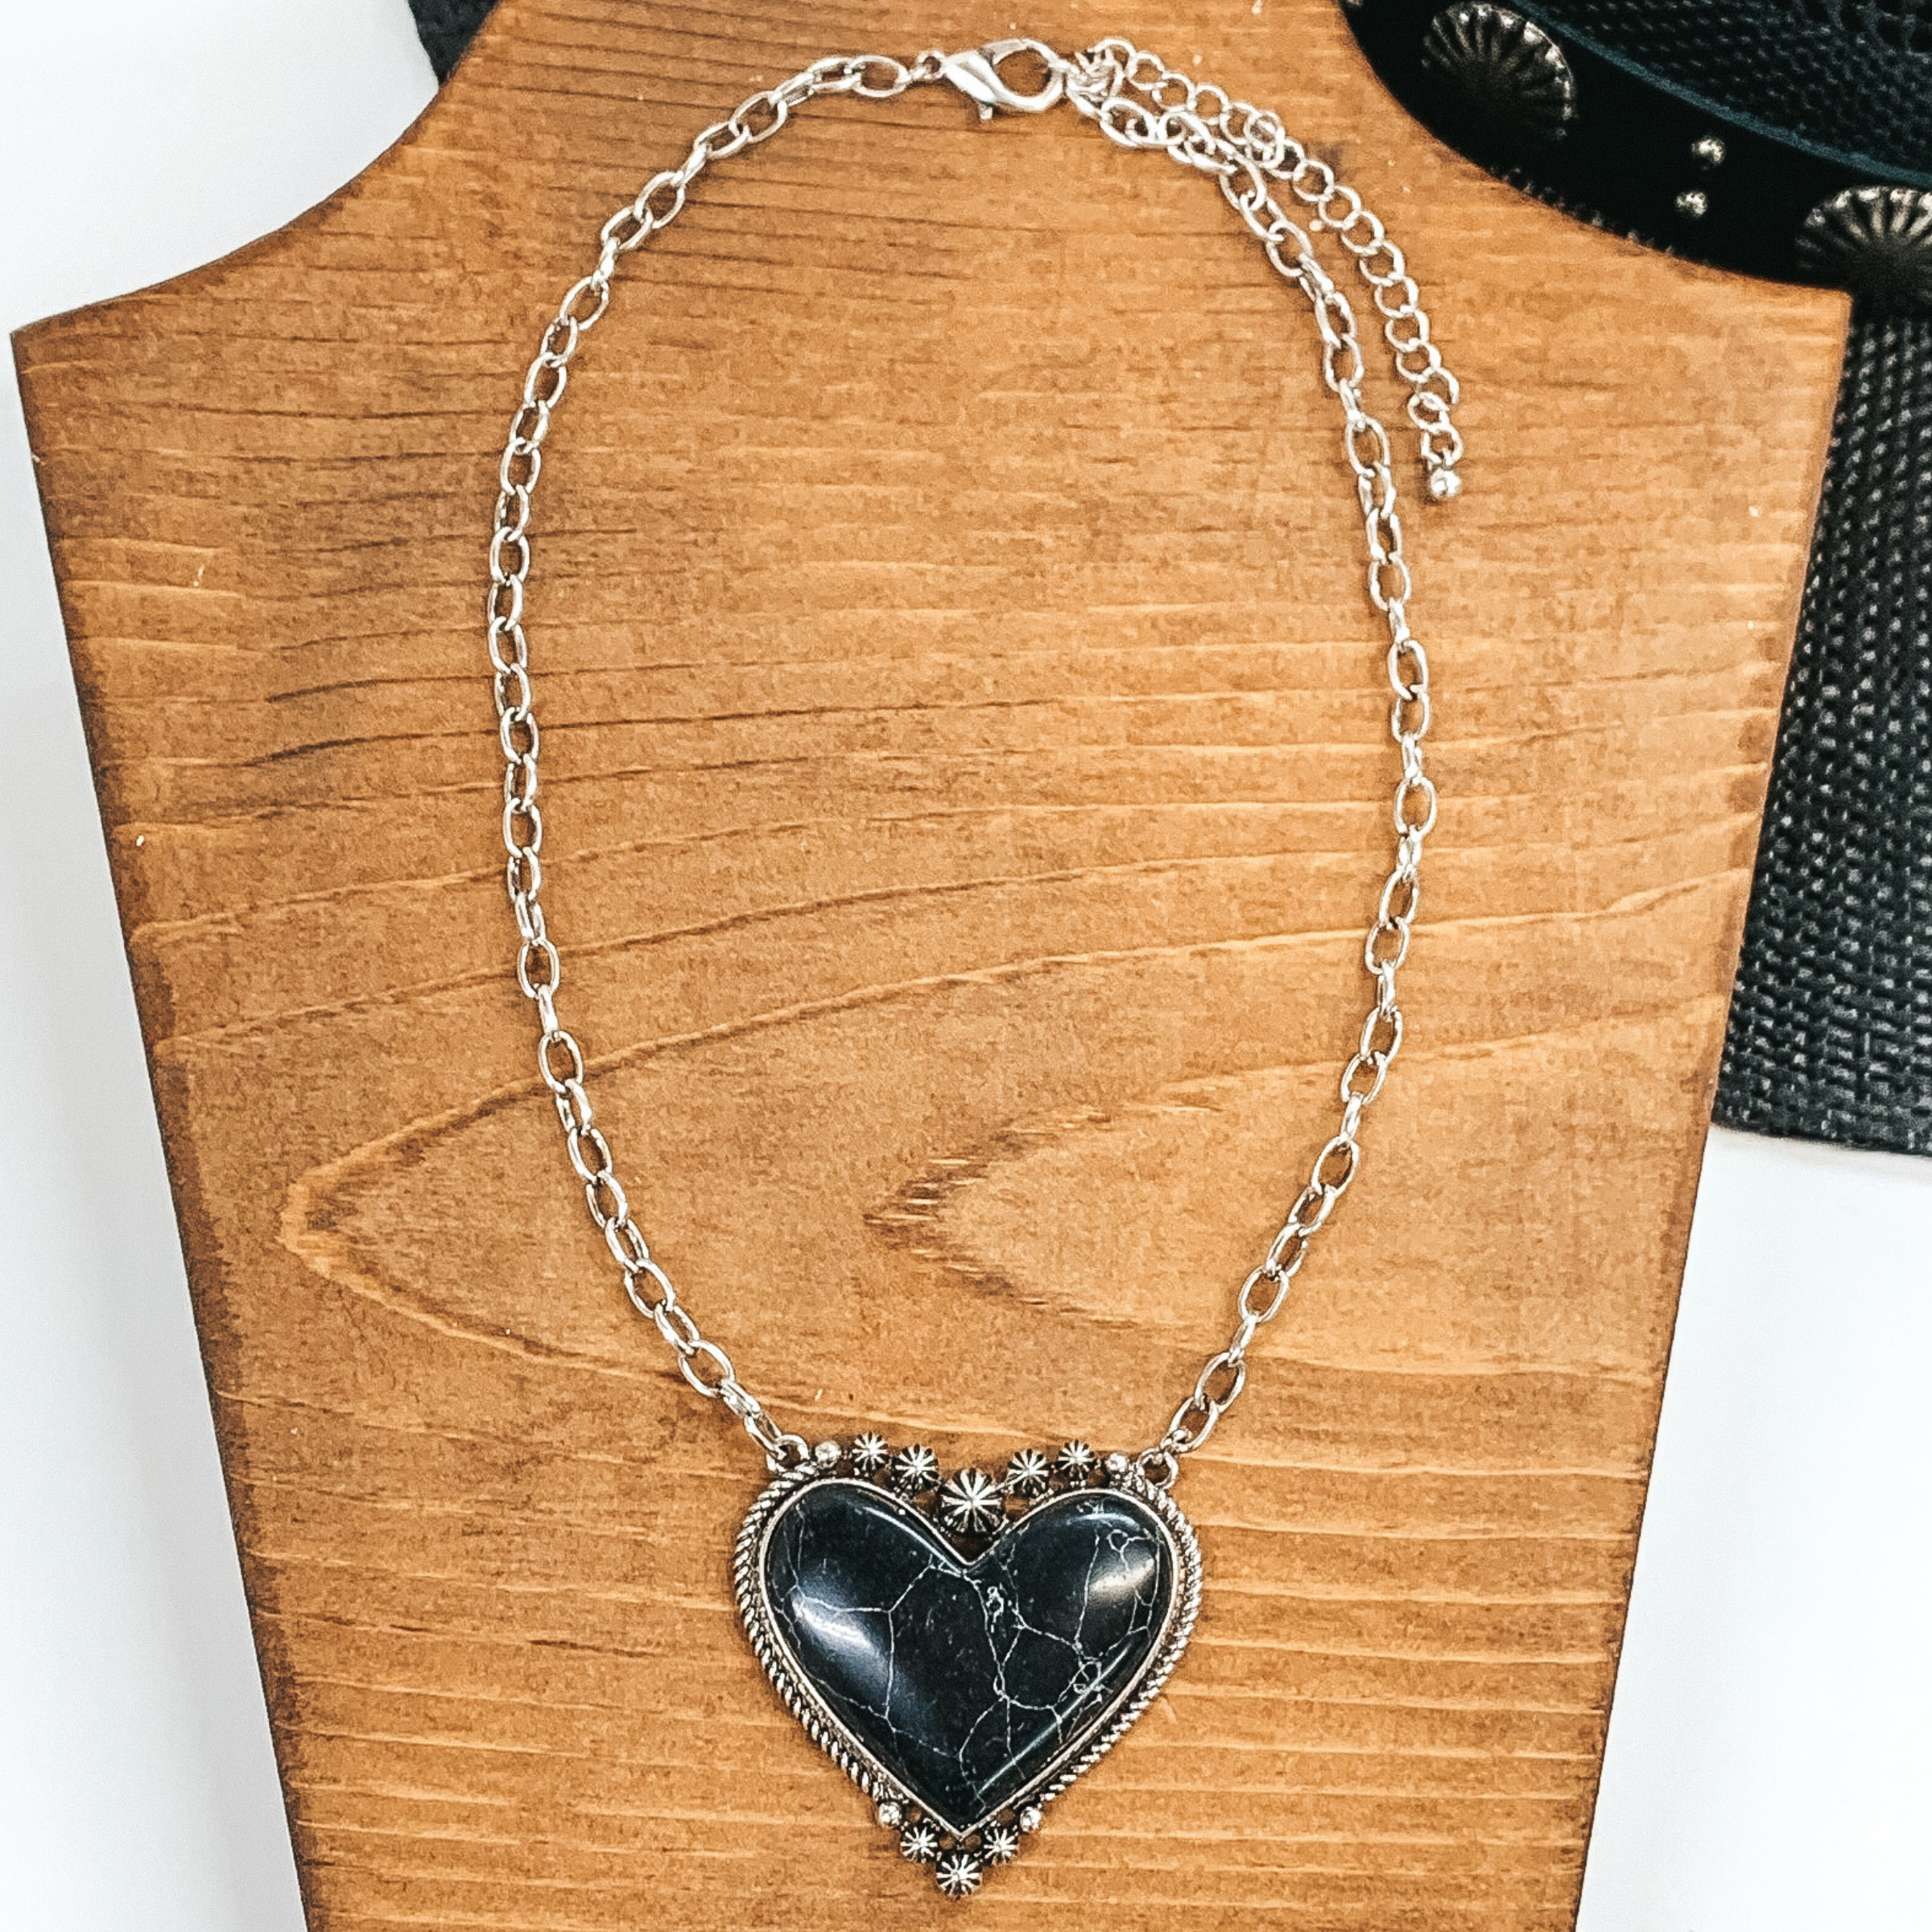 Silver chained necklace with heart pendant. The heart pendant is outlined in silver with a black stone. This necklace is pictured on a wood necklace holder on a white and black background. 